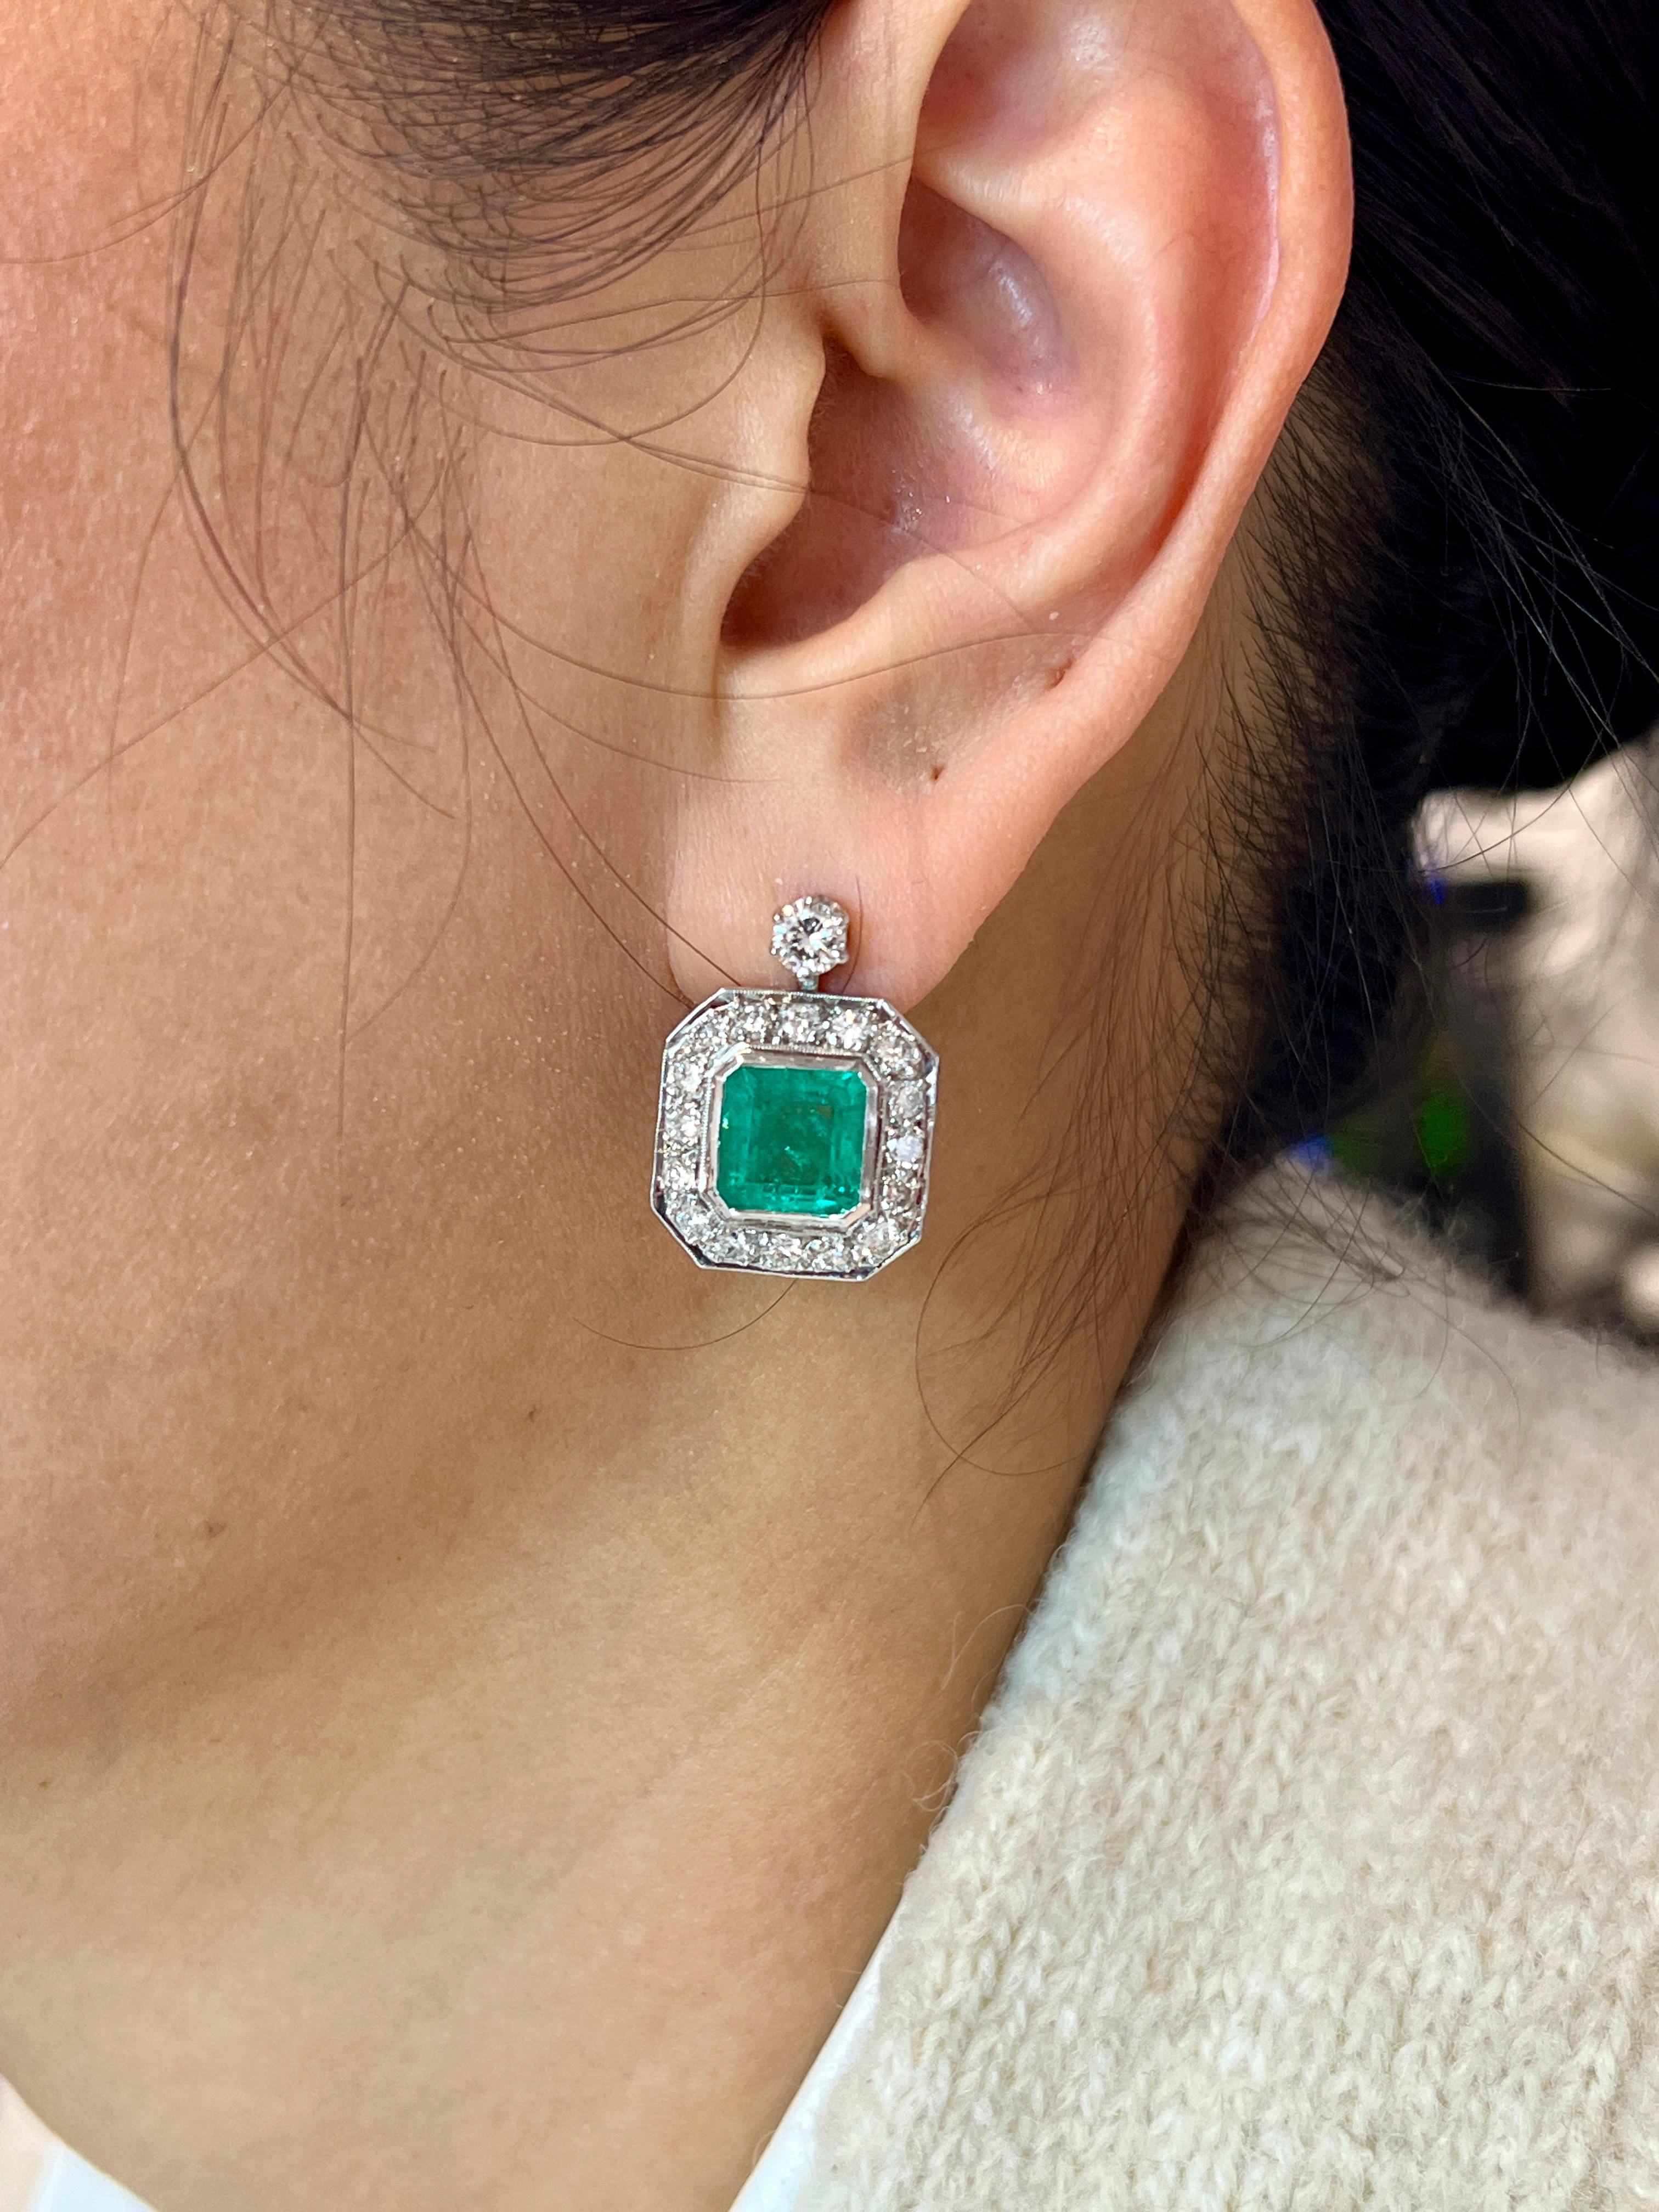 These stunning 8.50 ct GIA Colombian Emerald & Diamond earrings are sure to turn heads. The diamonds to these earrings are G/H in color and SI1/SI2 in clarity. An amazing addition to any wardrobe.